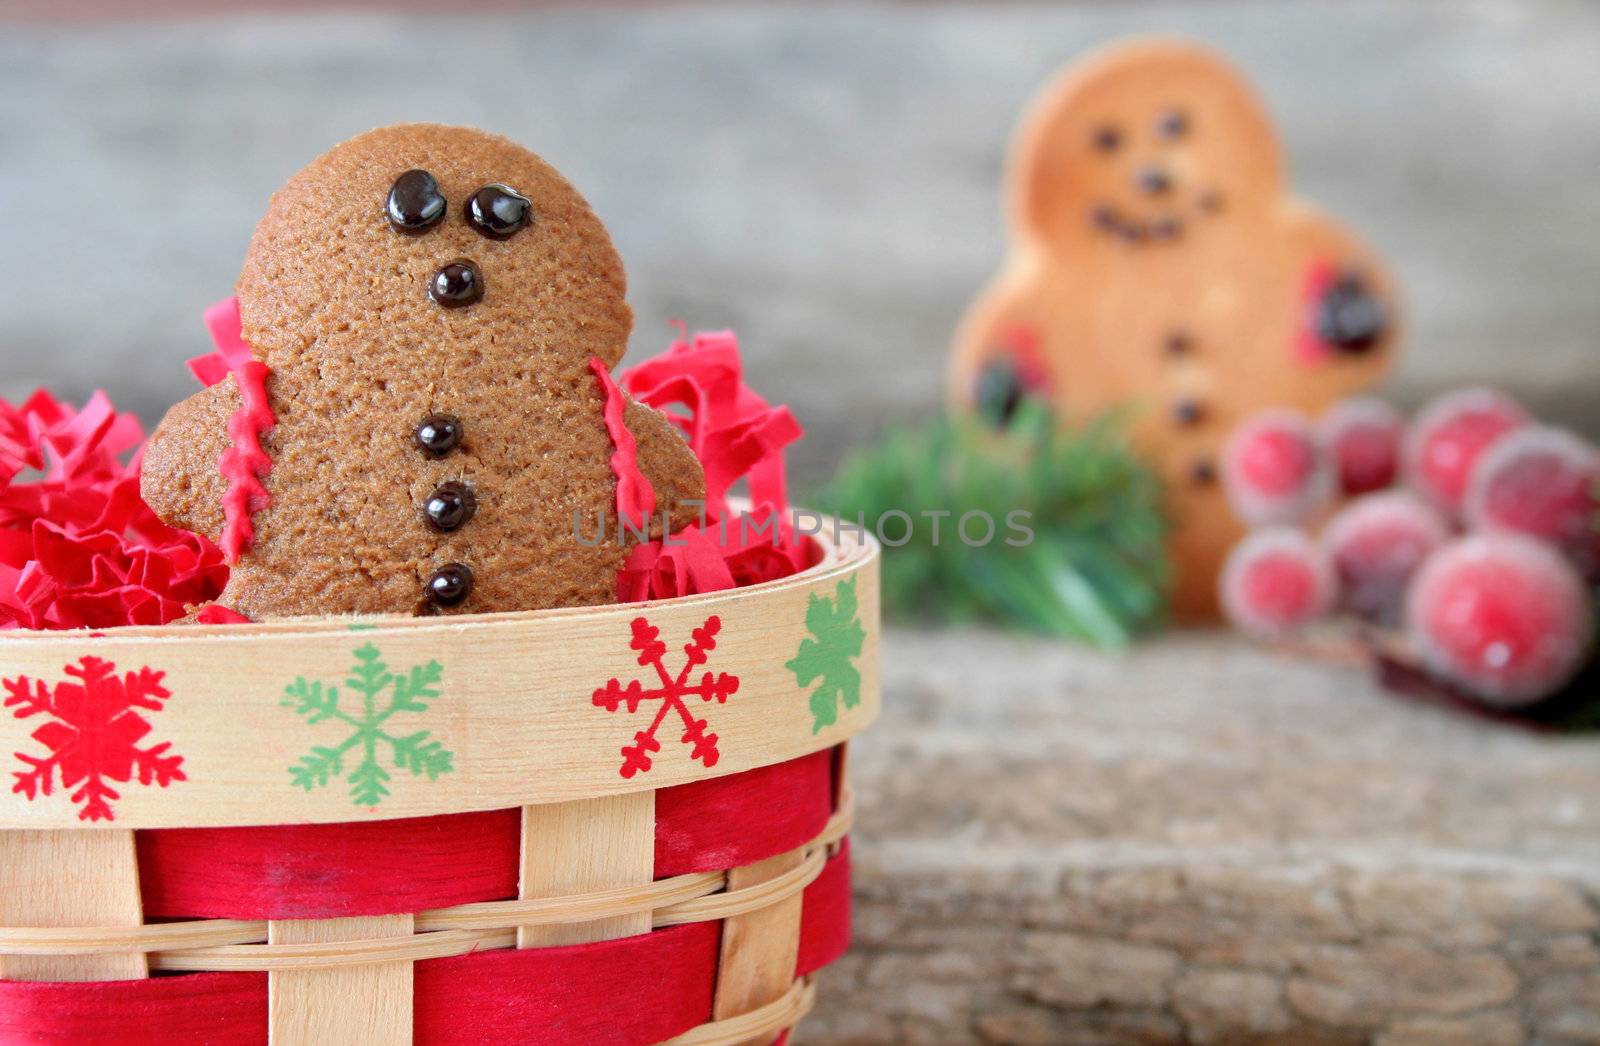 Gingerbread man in a basket with another in the background. Used a selective focus with a shallow depth of field.